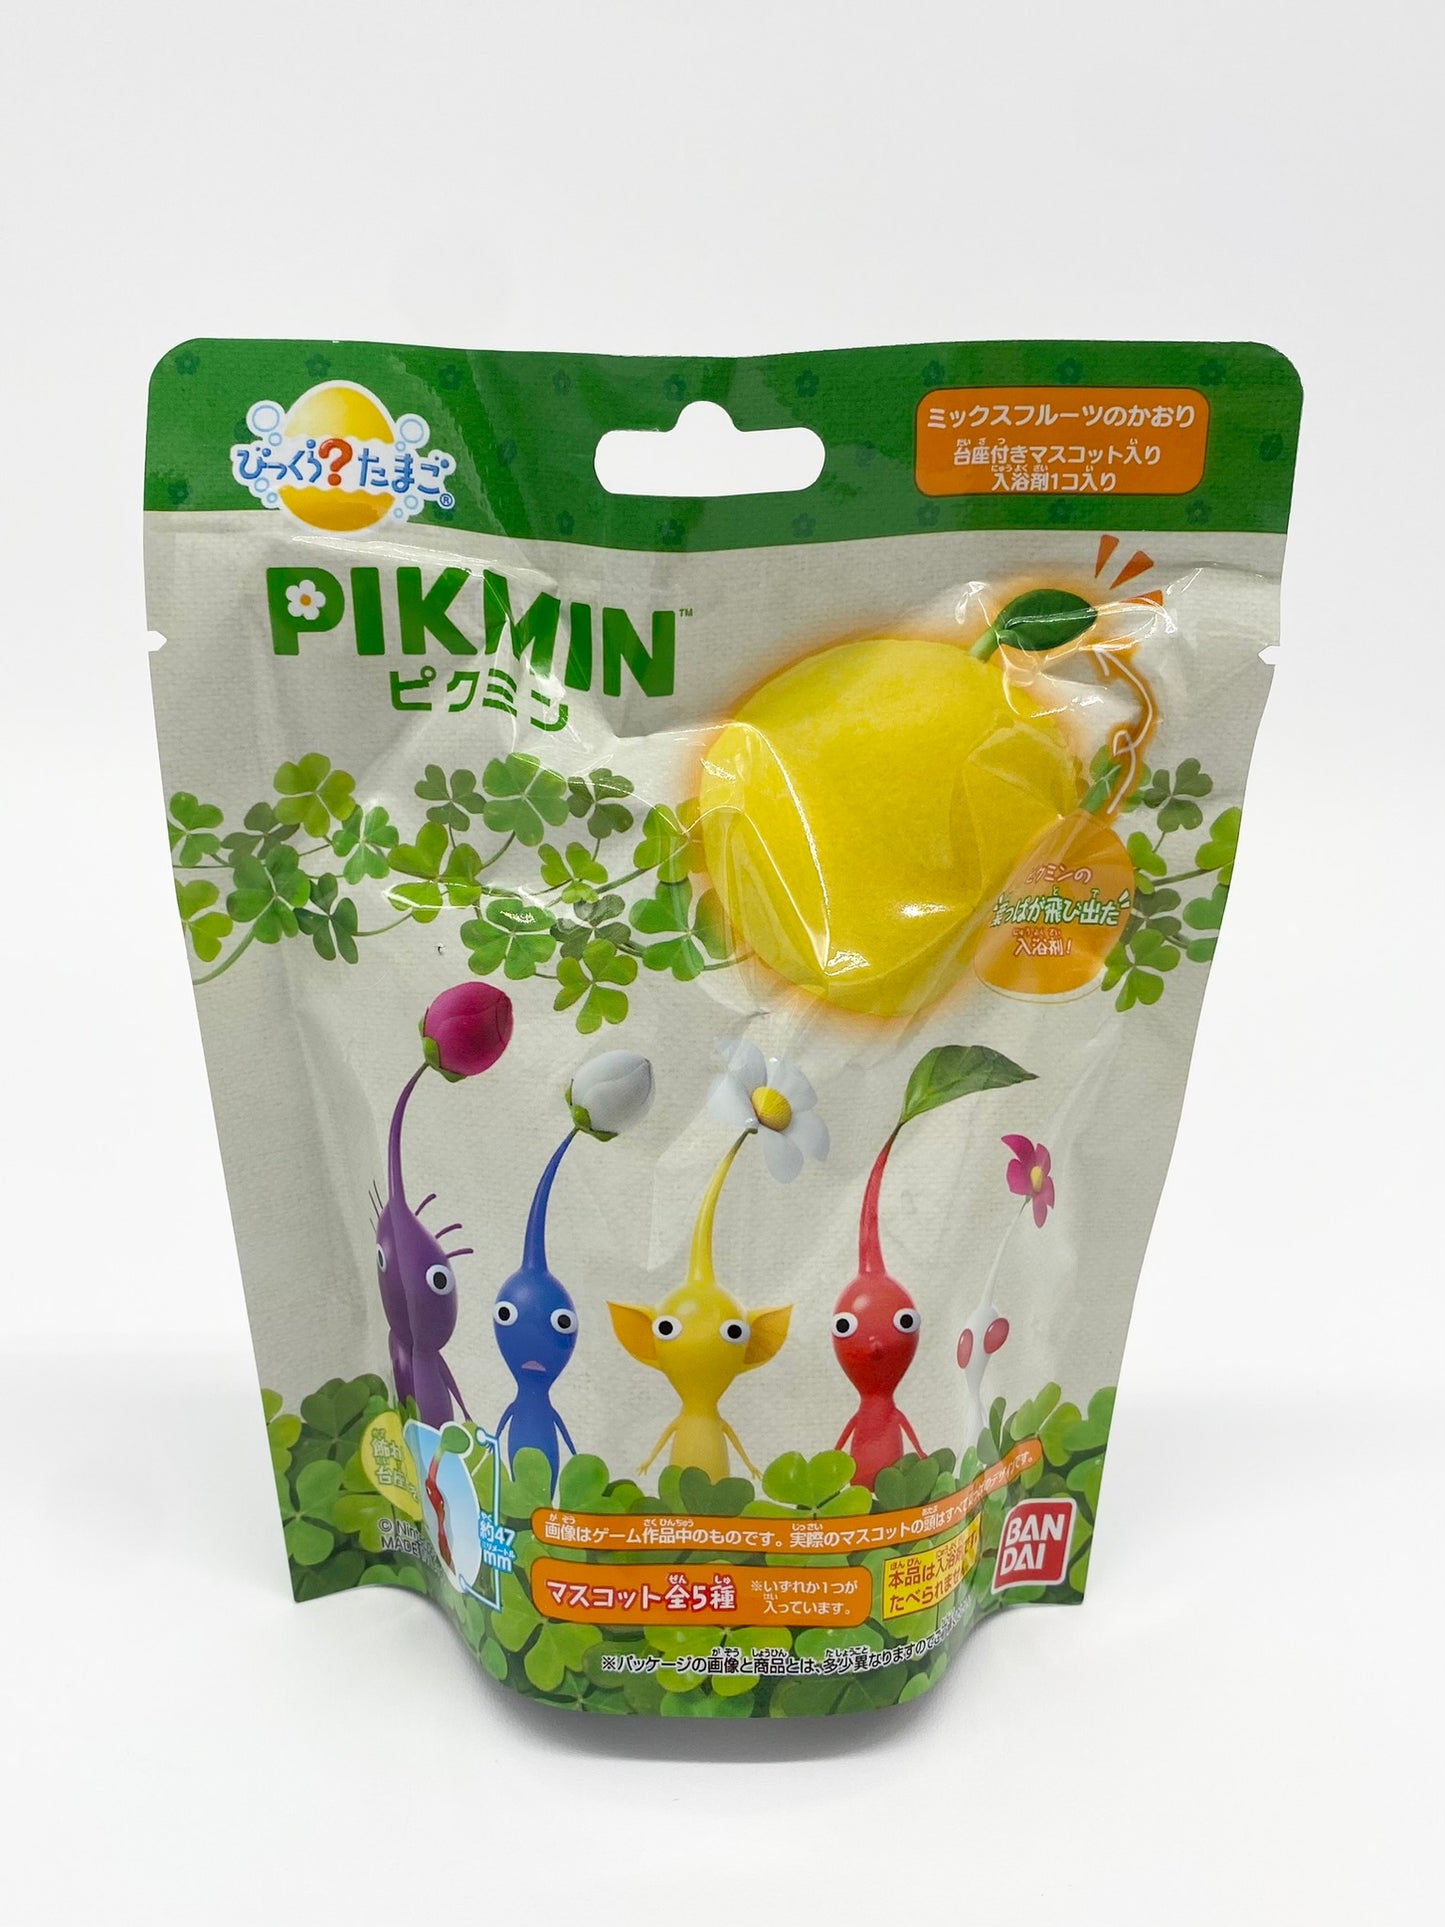 Pikmin Official Bandai Bath Bomb with Mystery Figure